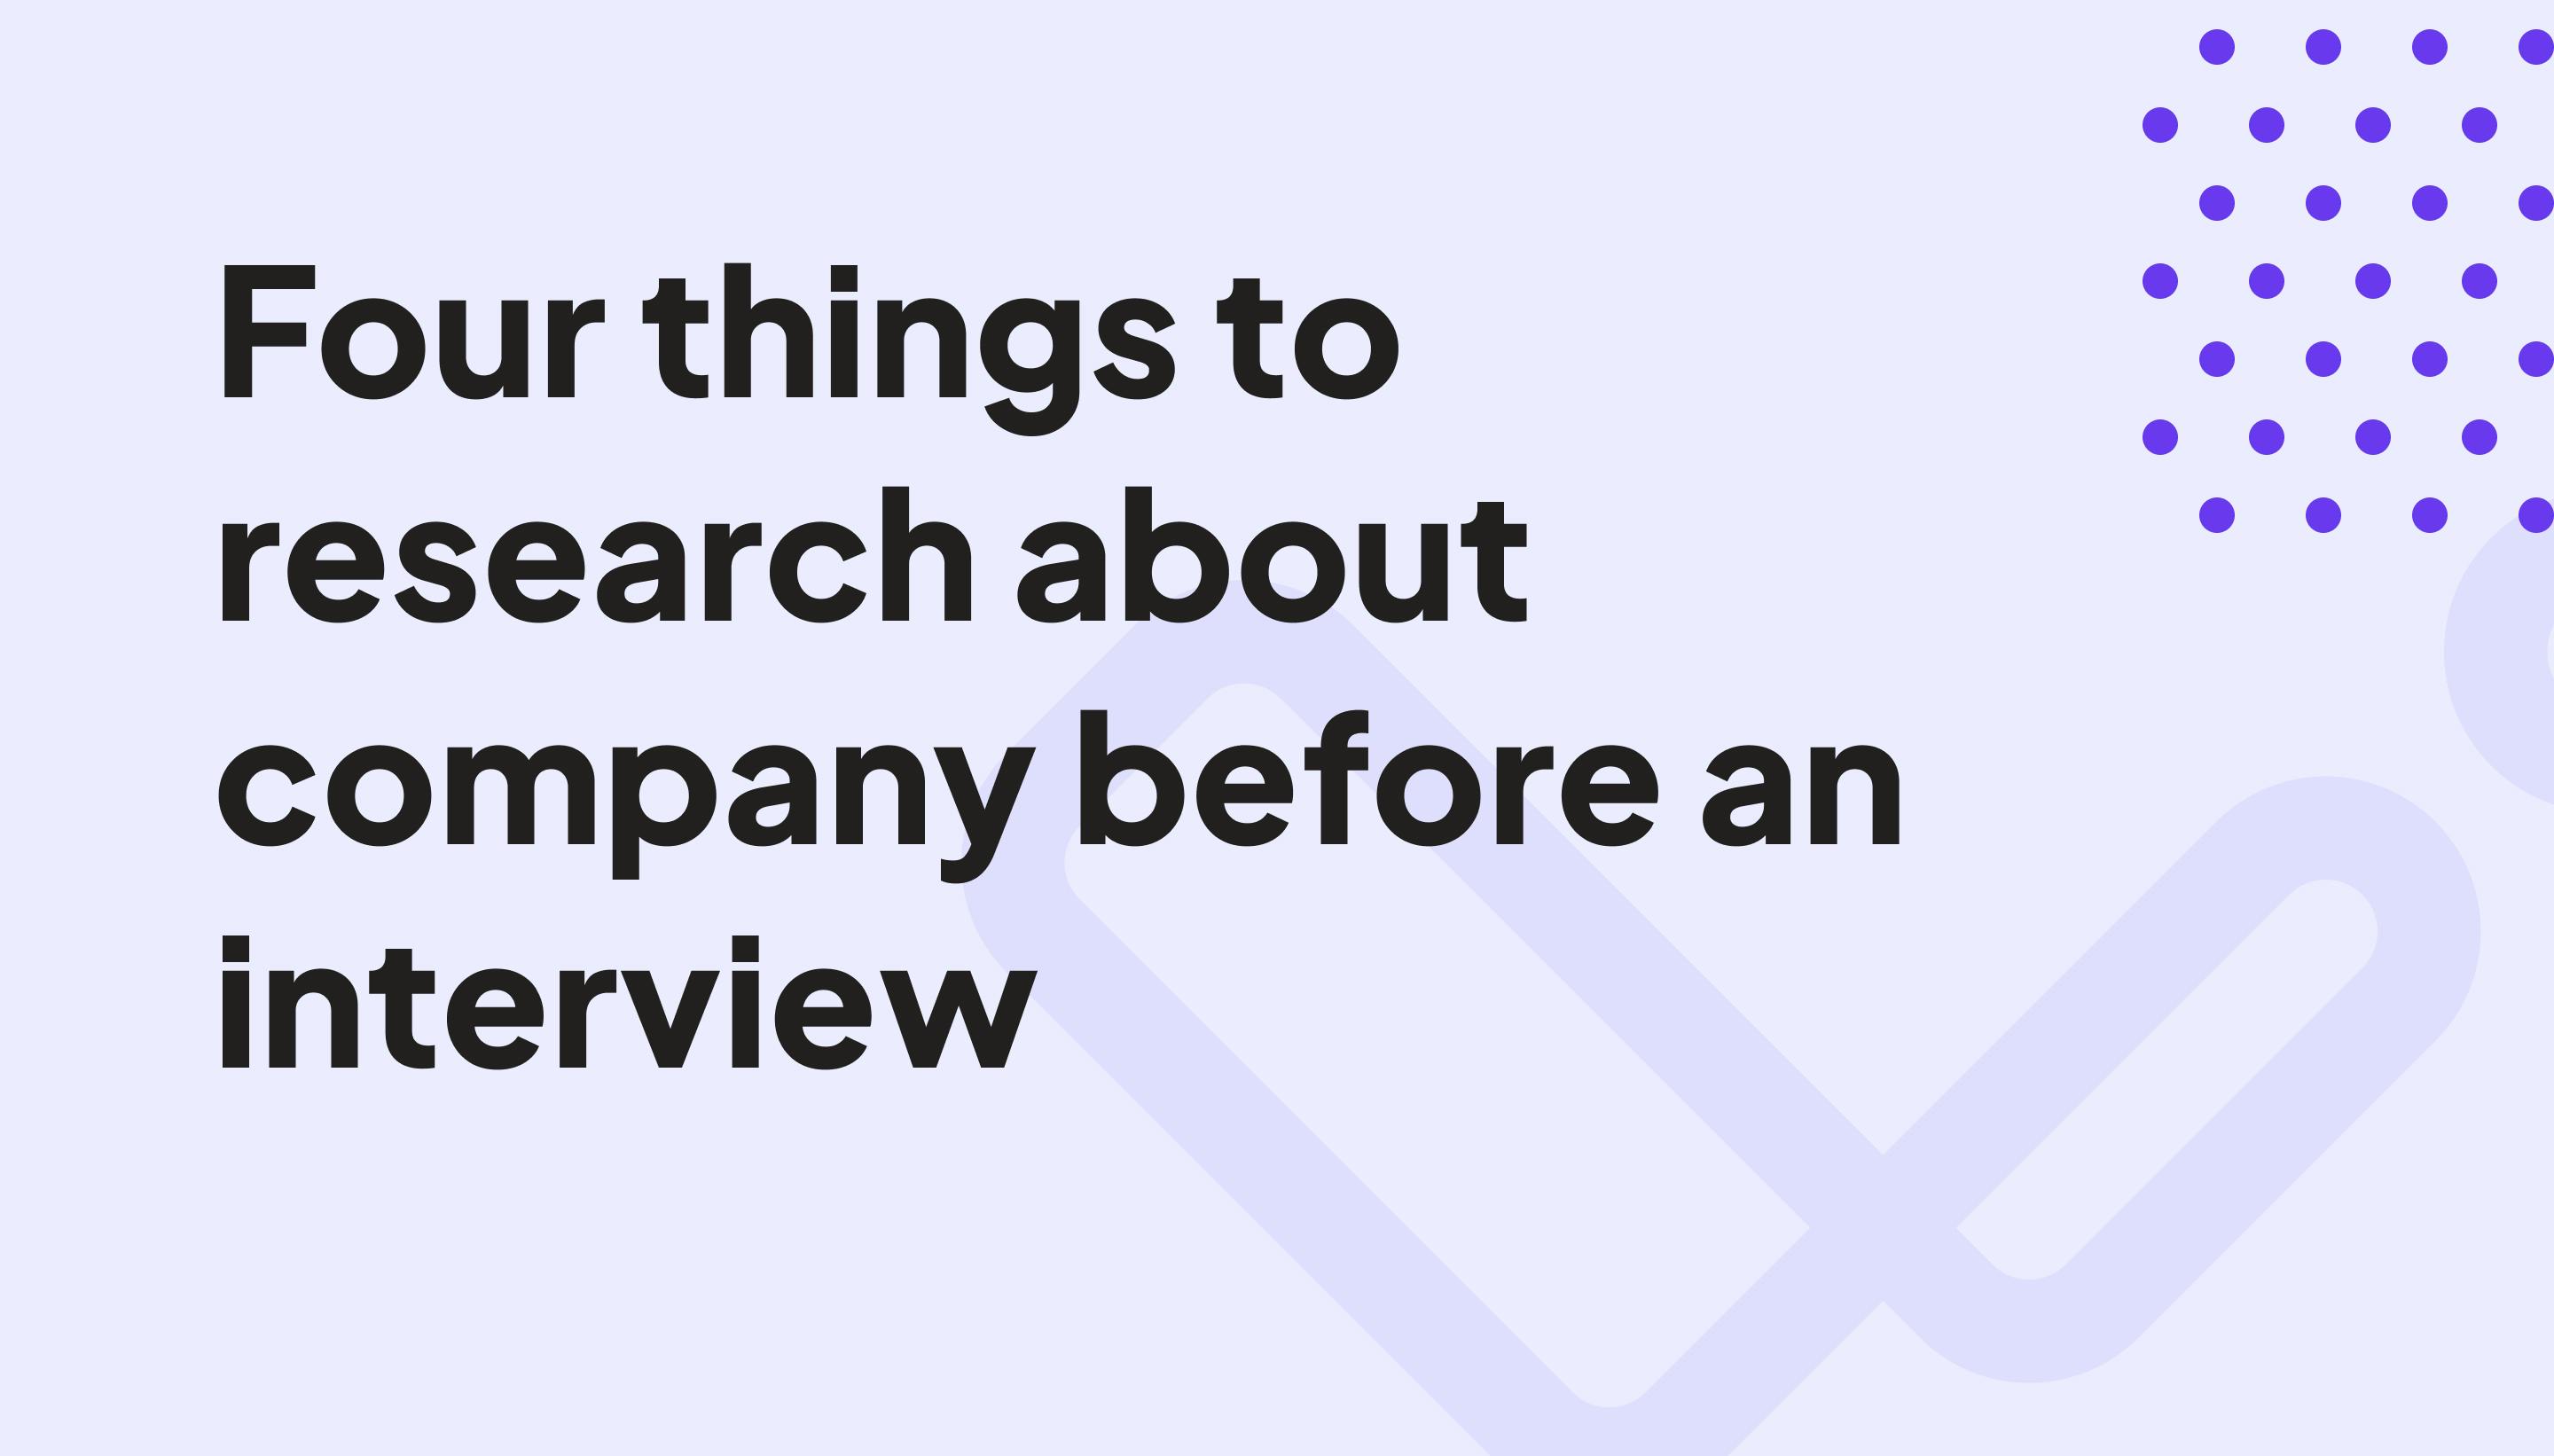 Four things to research about a company before an interview